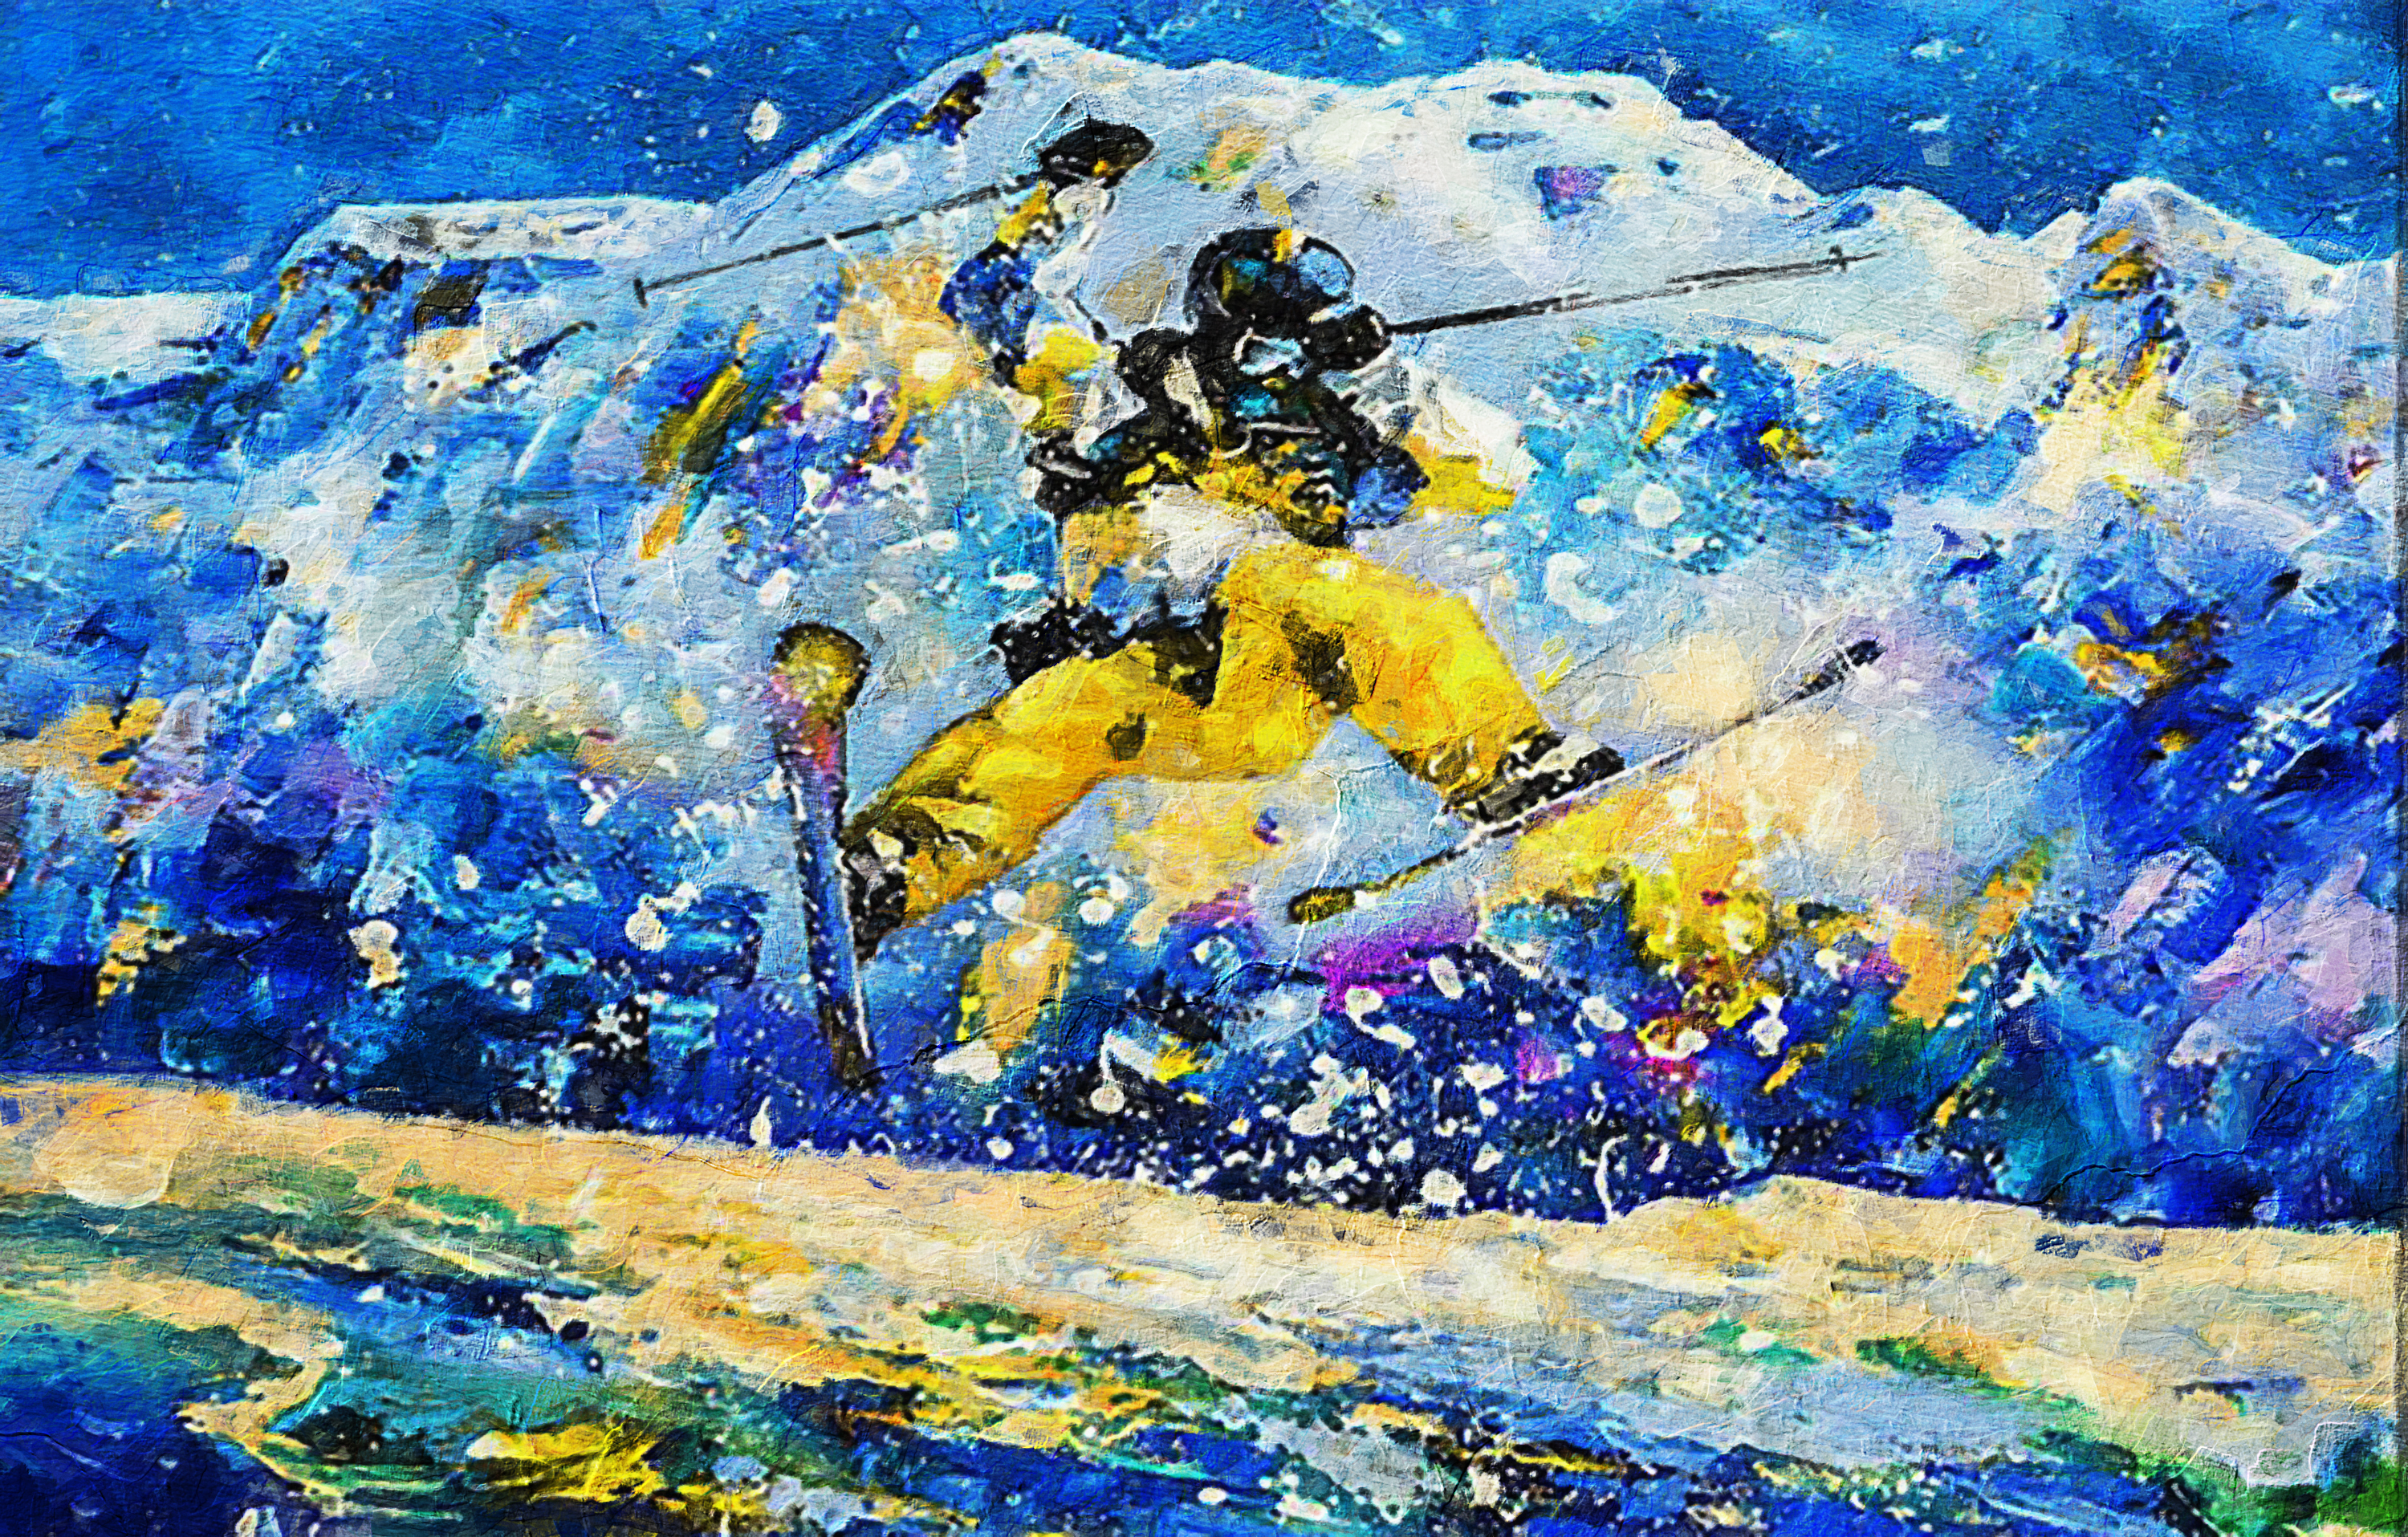 Sports Art - Skiing - Jump painting for sale Ski7